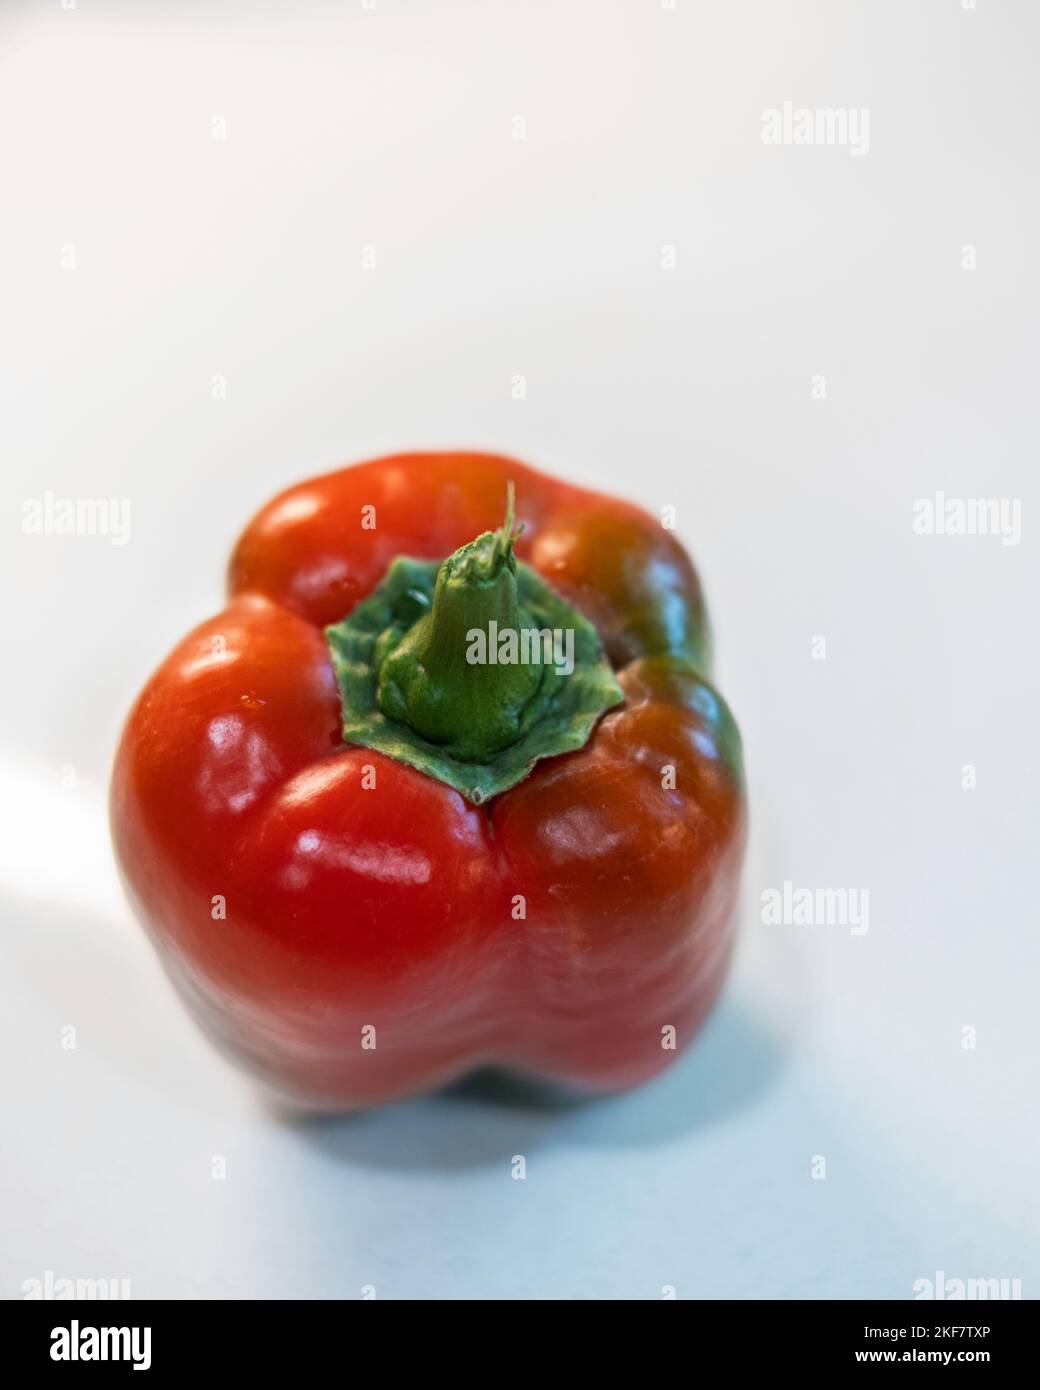 A single red bell pepper, Capsicum annuum, on a white background. Stock Photo